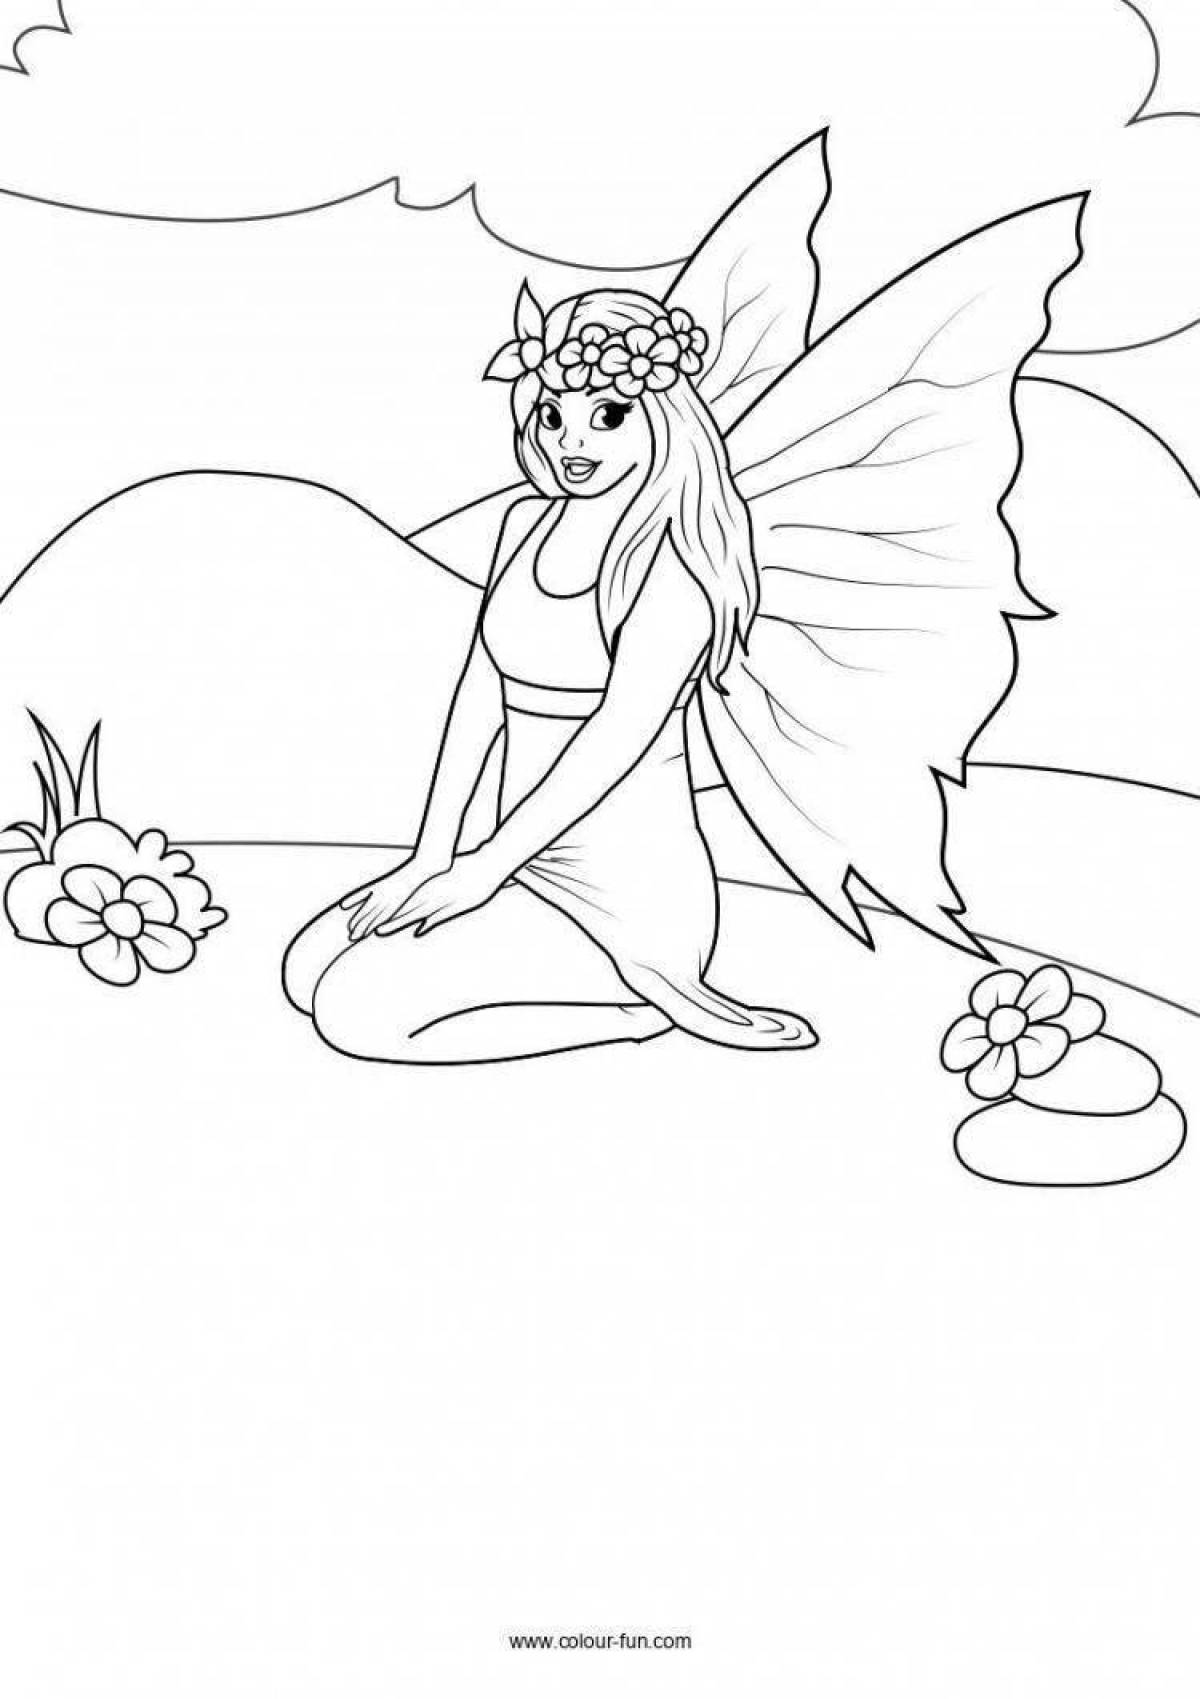 Fairy tooth glitter coloring book